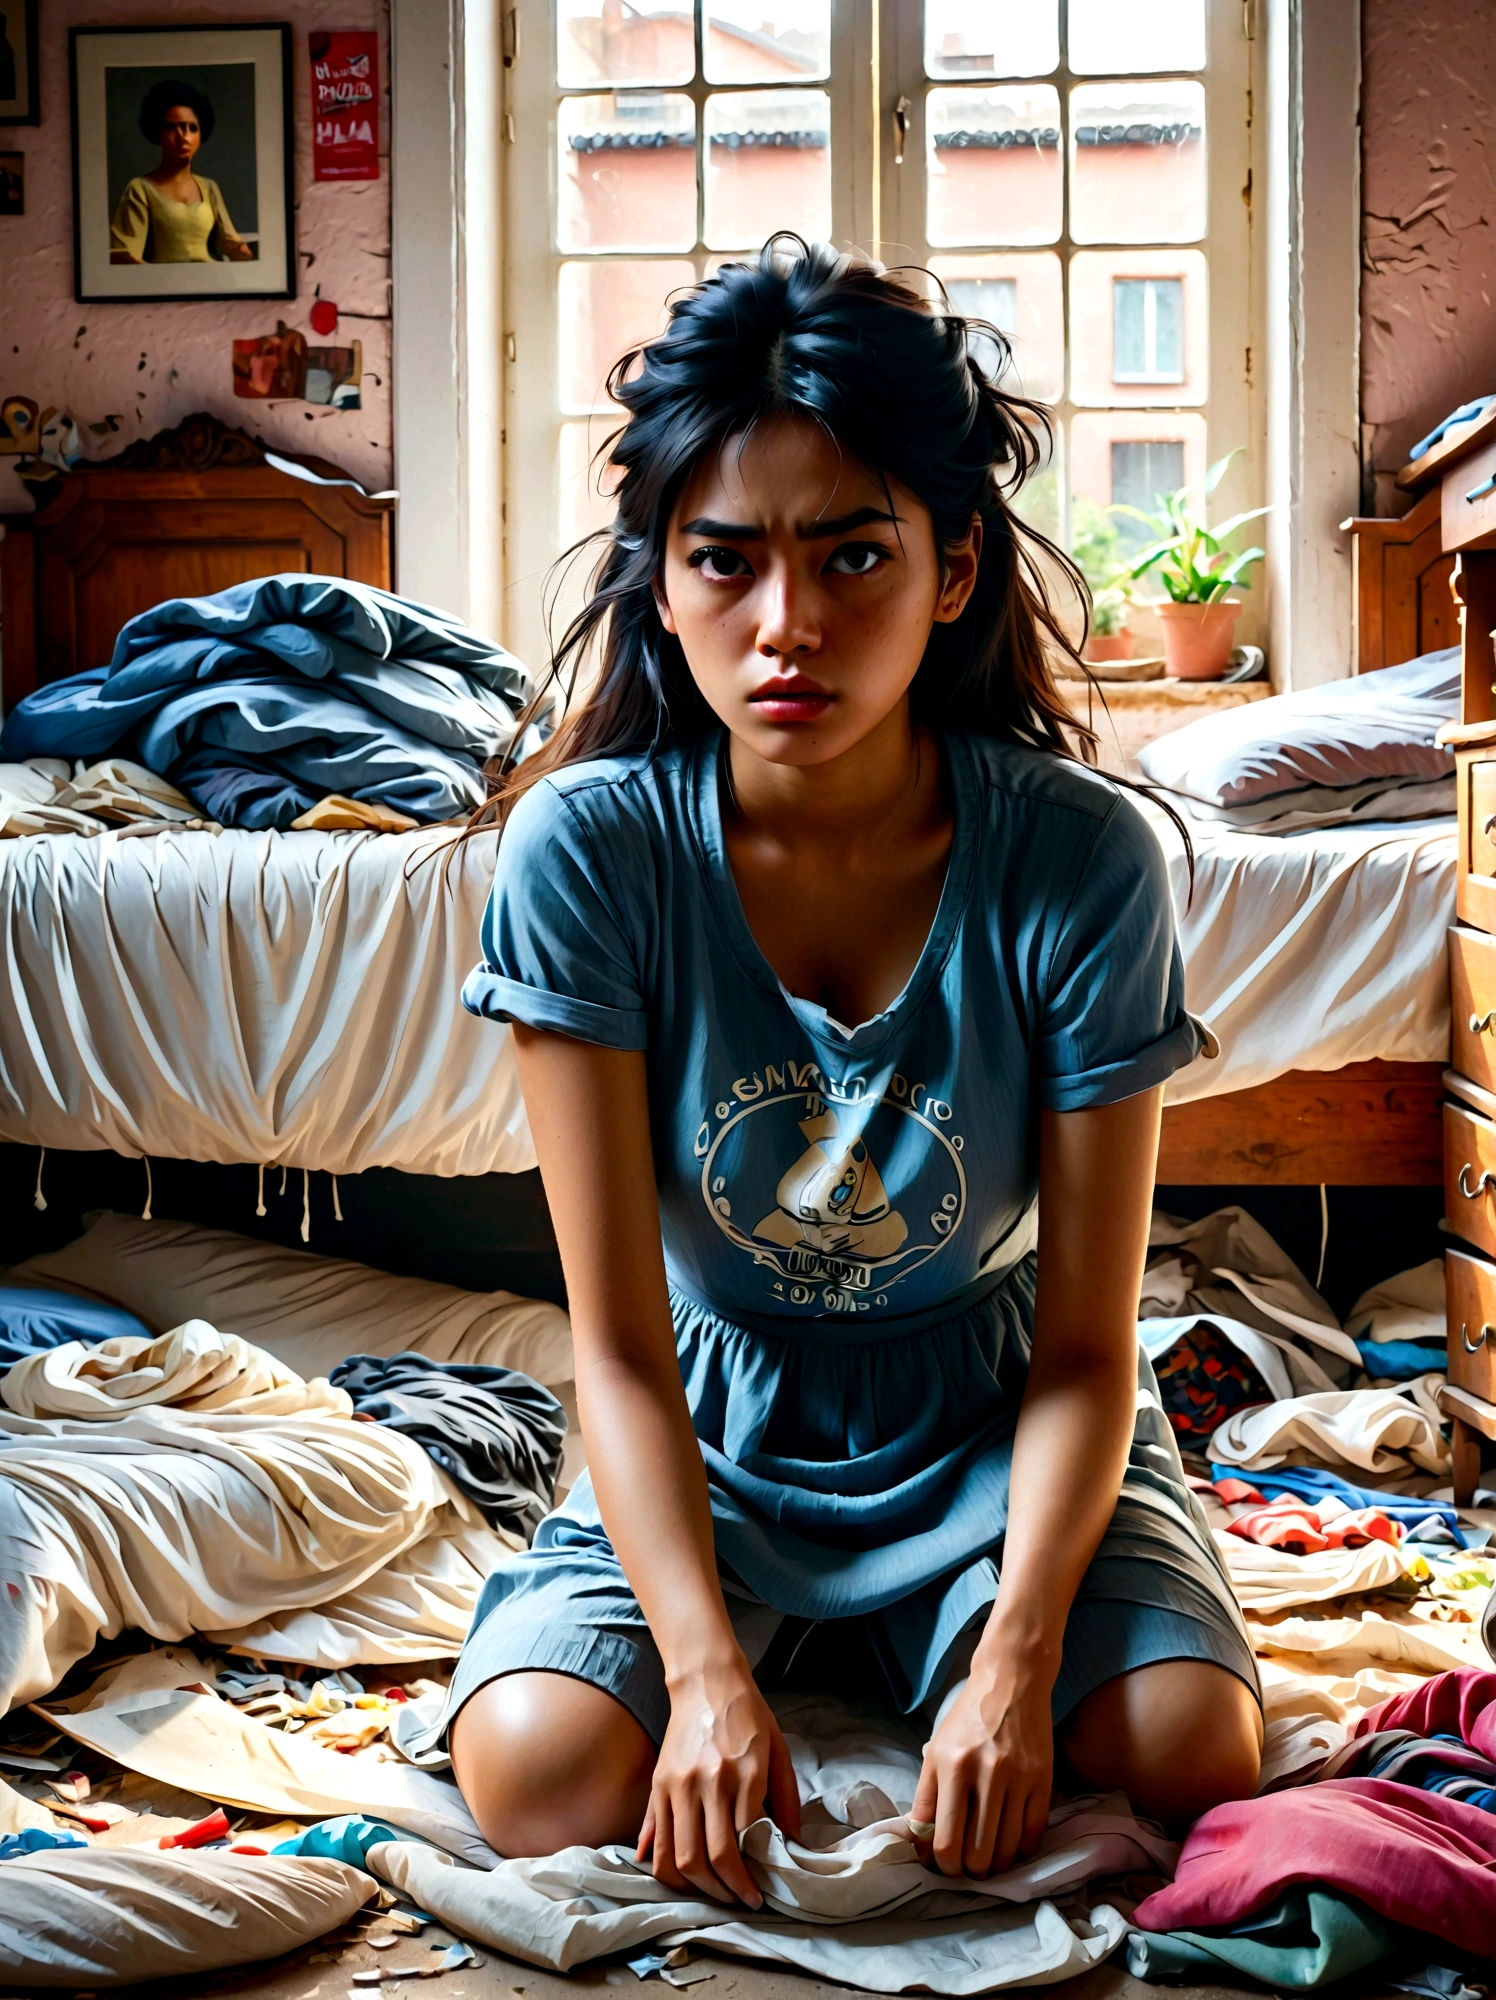 (a young girl with a disgusted expression), (Disgusted look:1.5), Messy hair, Sweating, Cleaning a messy room, dust, cobwebs, A bunch of clothes, Unmade bed, garbage on the floor, Realistic details, Realistic shadows, Realistic lighting, Natural light, Super Fine, Sharp focus, Physically Based Rendering, Extremely detailed description, major, Vivid colors